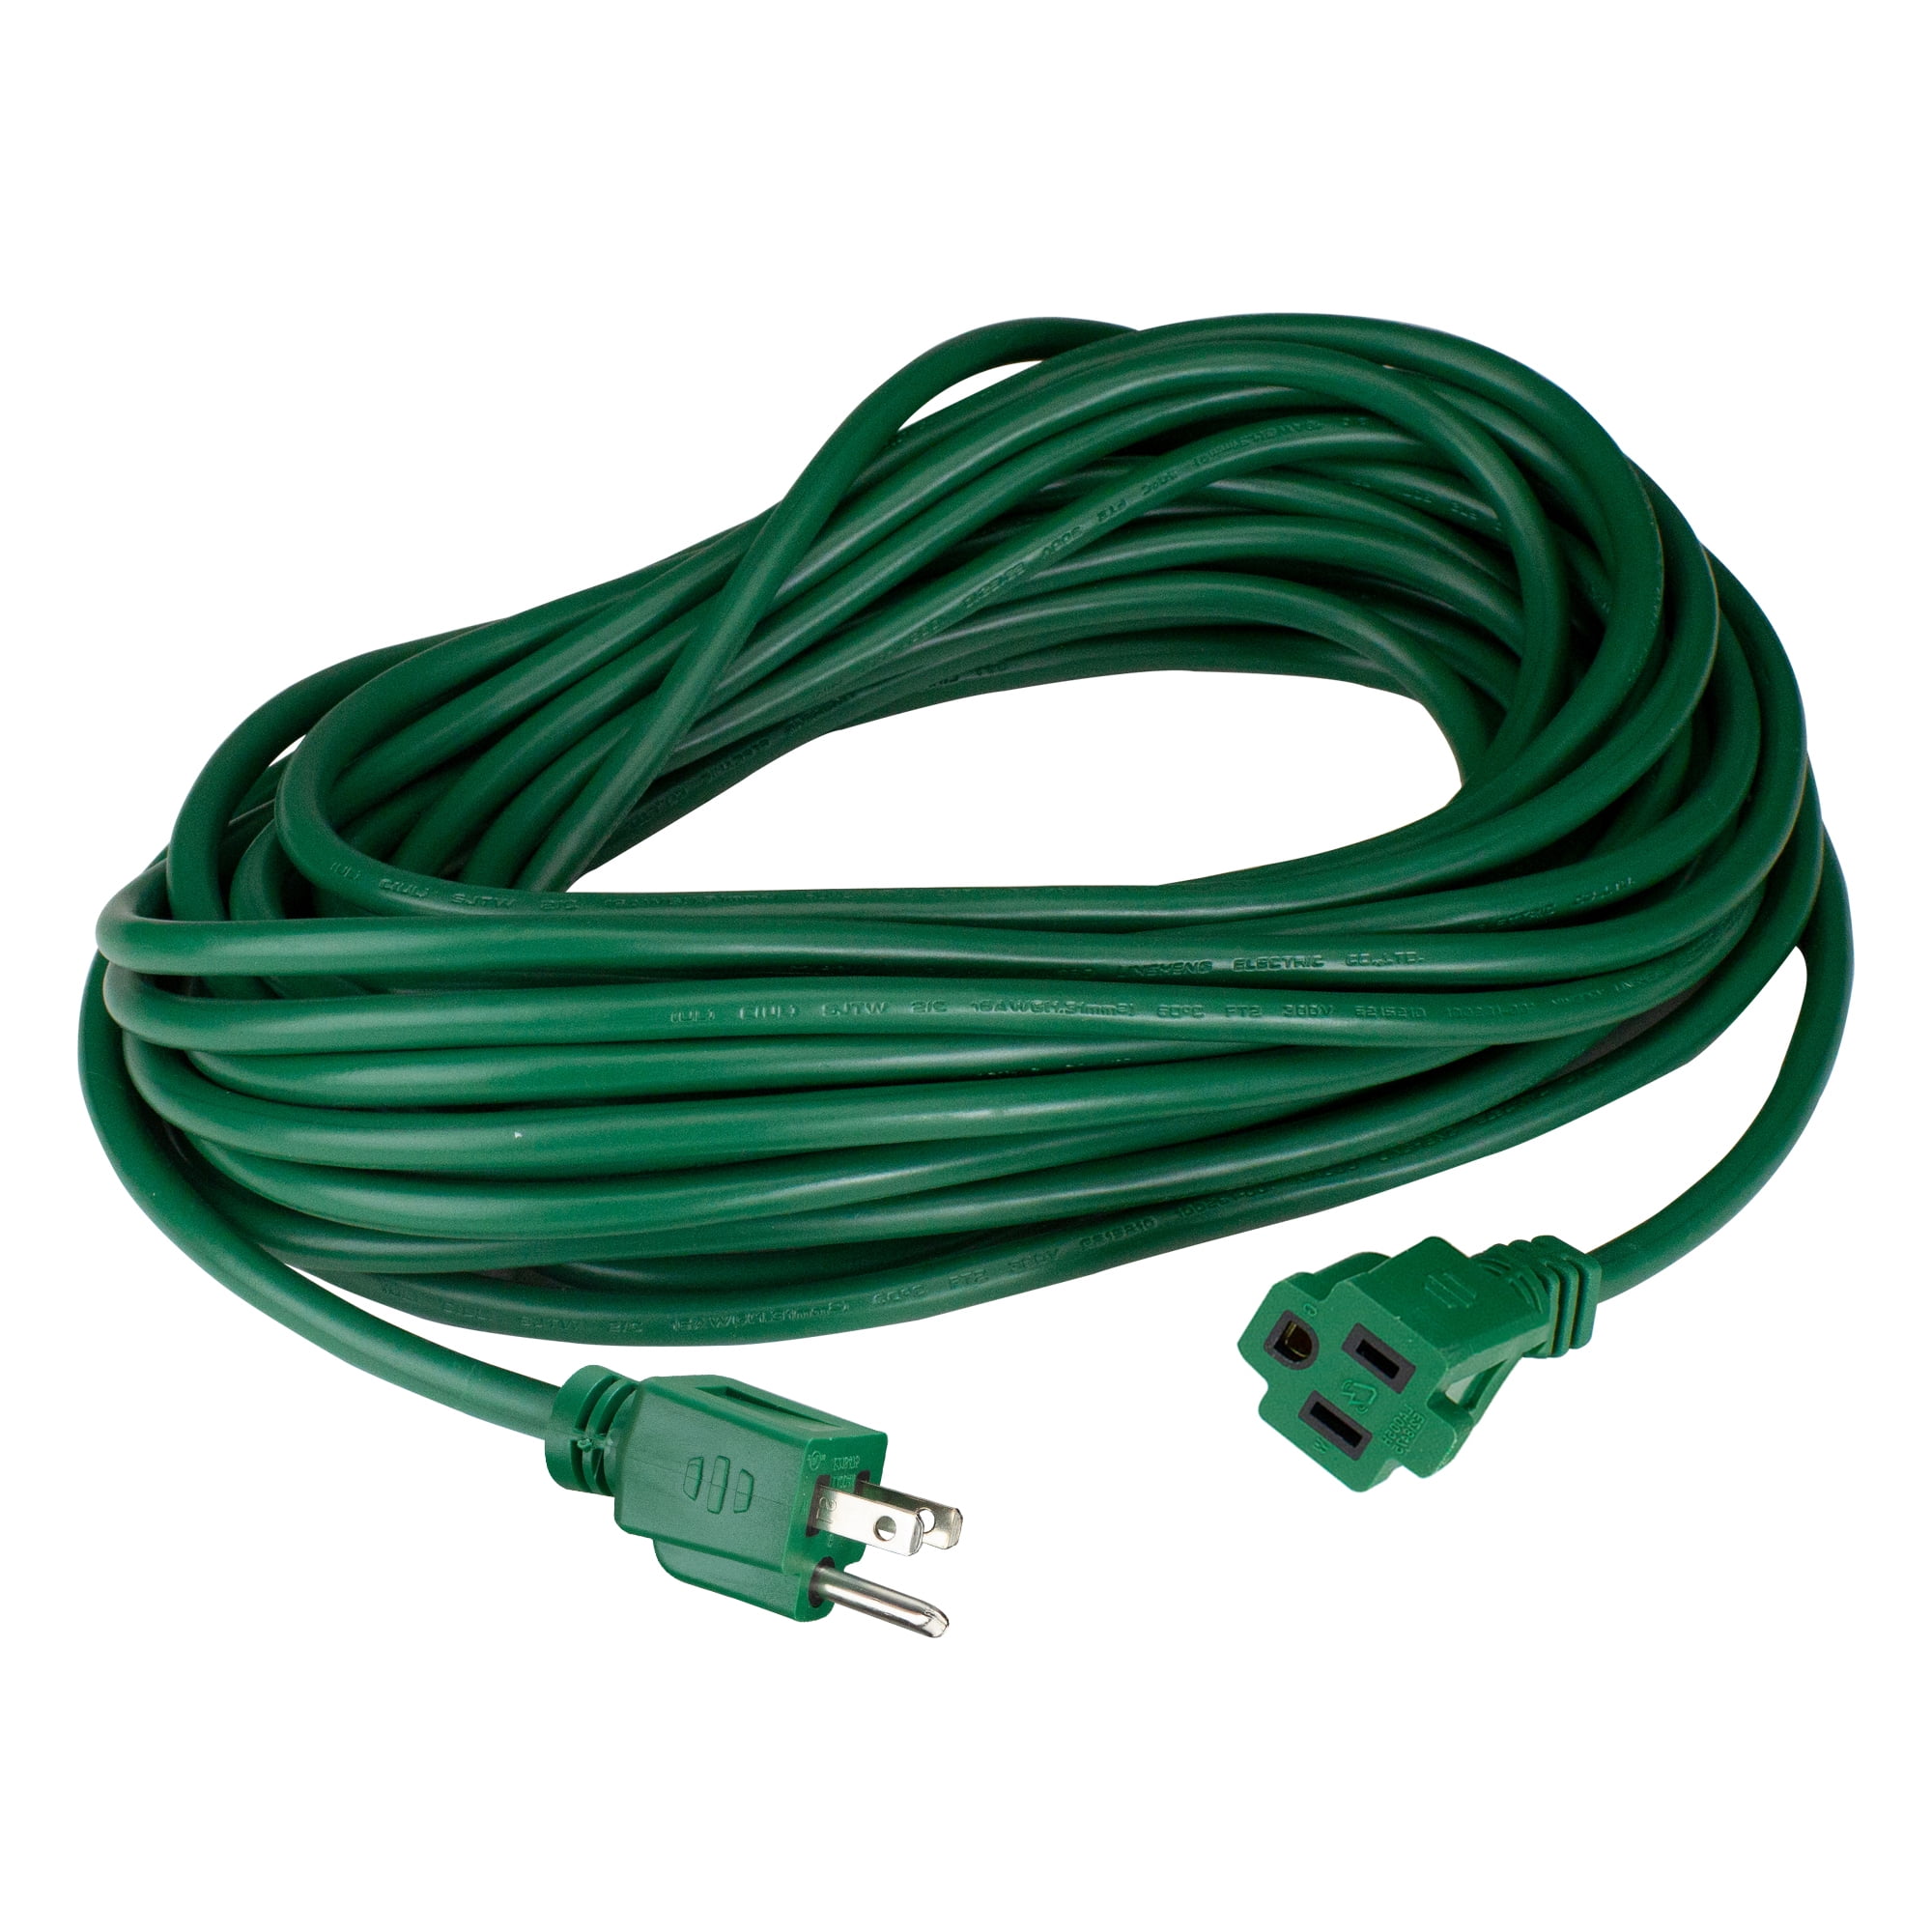 Shock cord - Foliage Green 3mm – Cams Cords